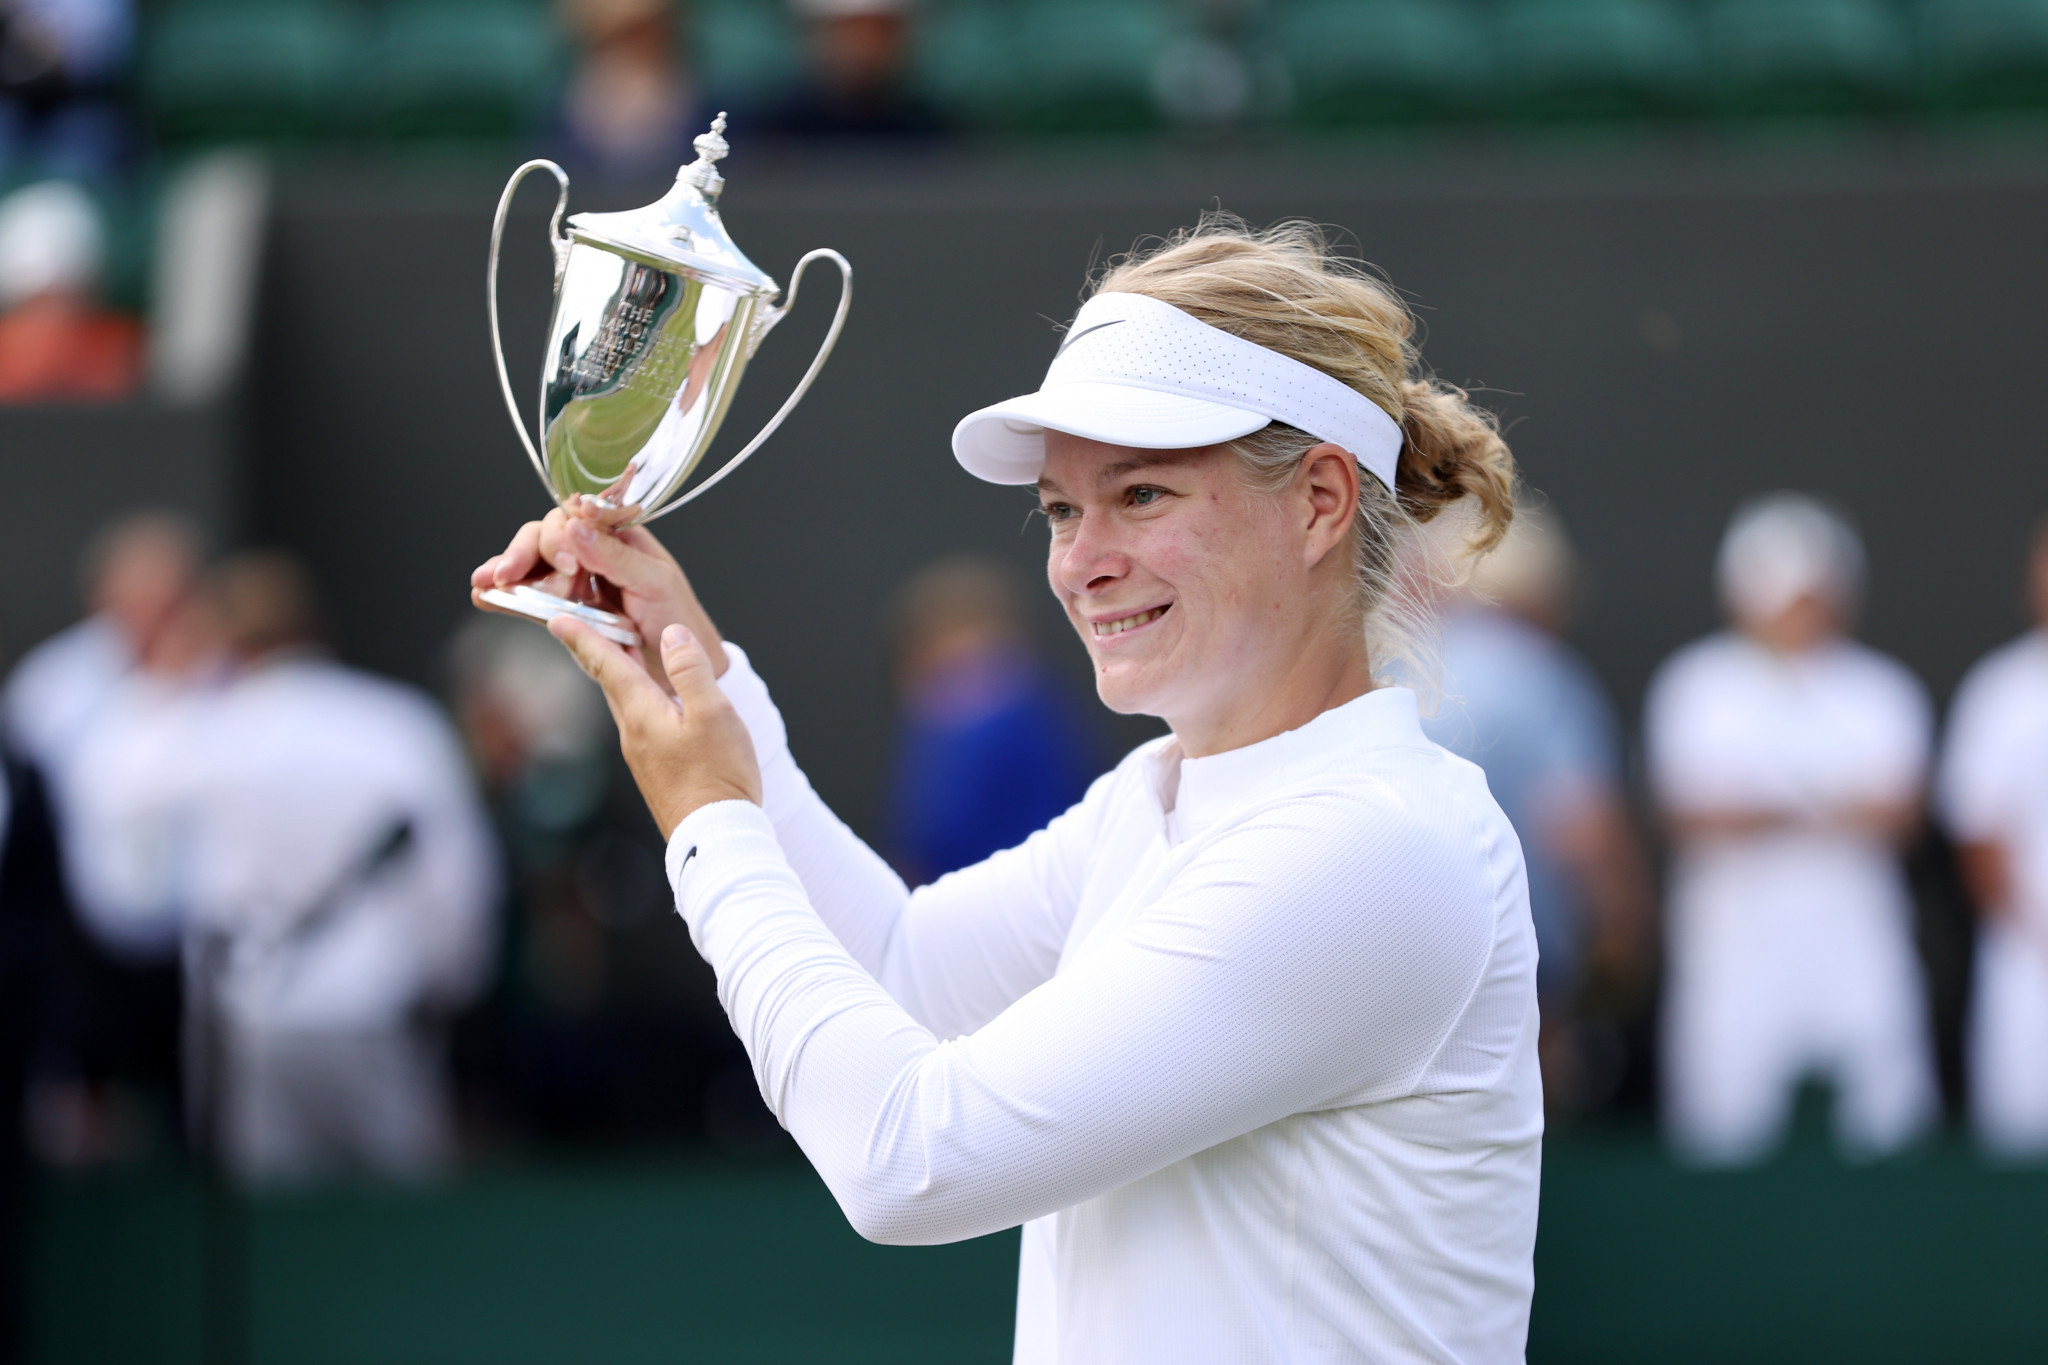 Diede de Groot claimed her 15th Grand Slam title today at Wimbledon ©Getty Images